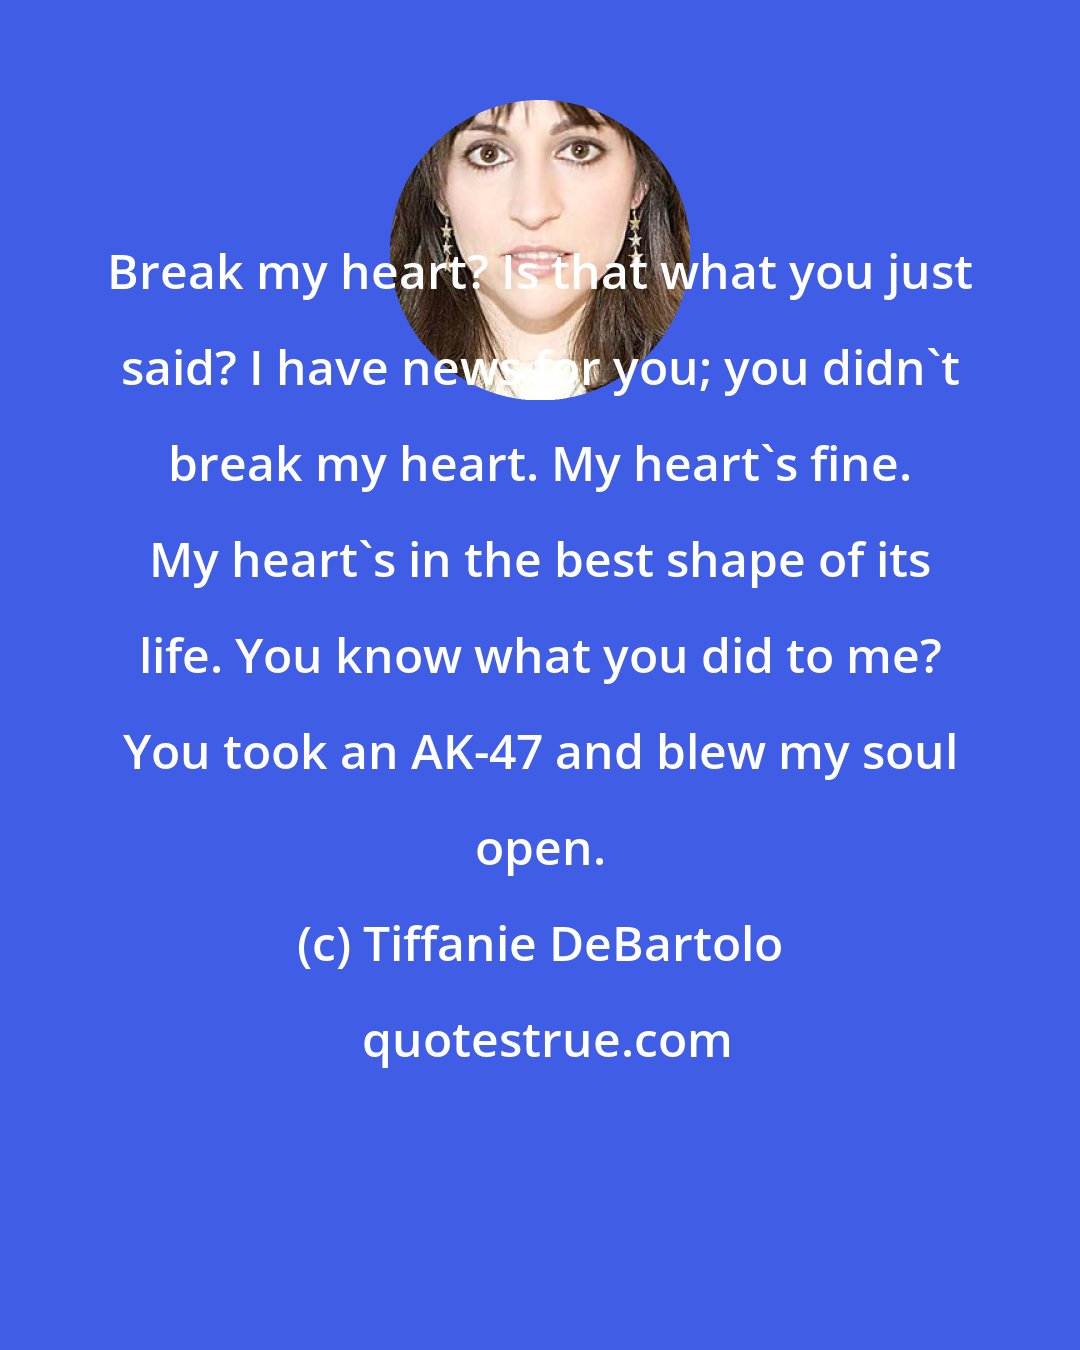 Tiffanie DeBartolo: Break my heart? Is that what you just said? I have news for you; you didn't break my heart. My heart's fine. My heart's in the best shape of its life. You know what you did to me? You took an AK-47 and blew my soul open.